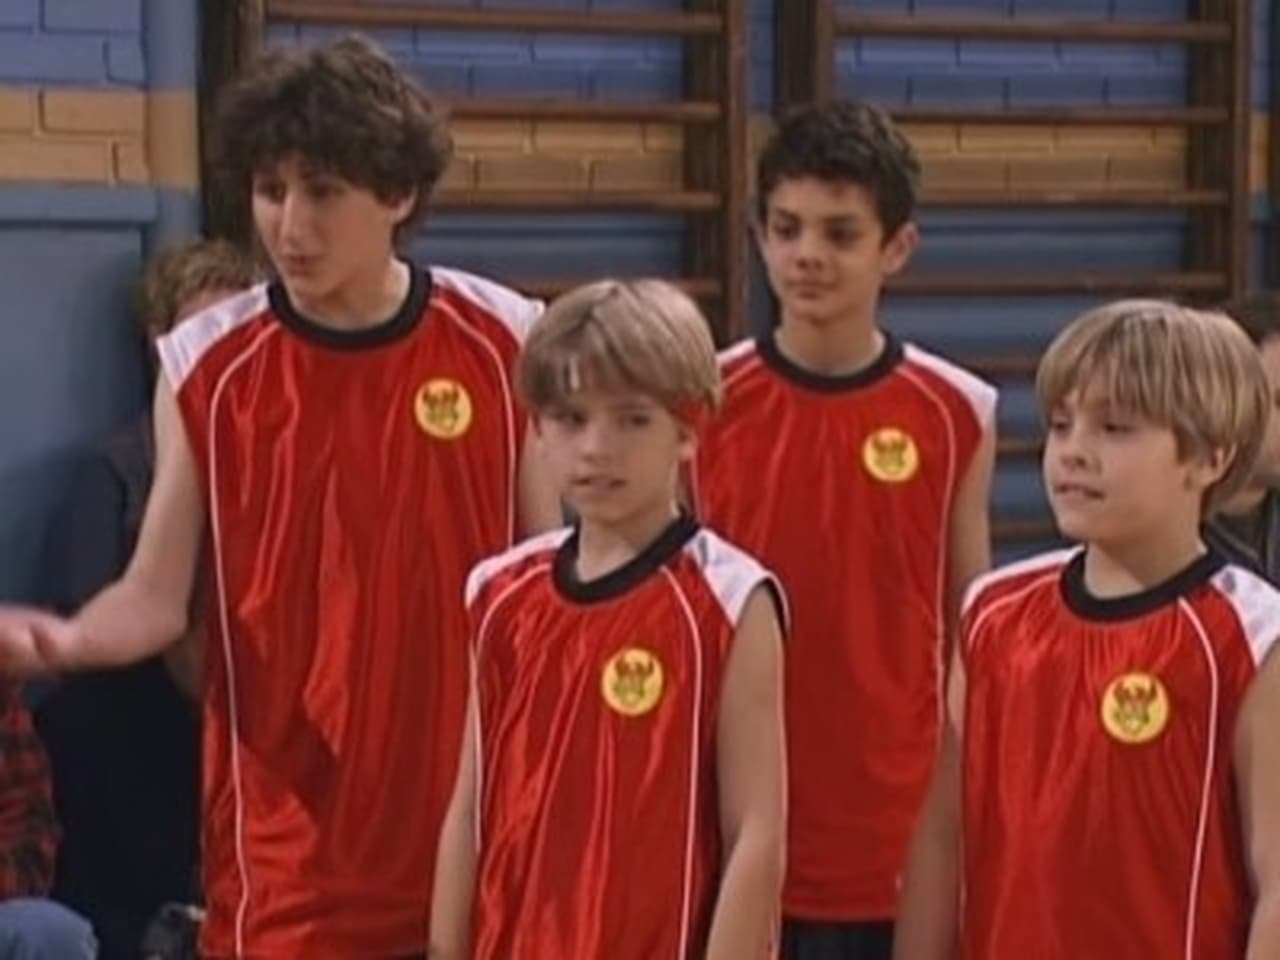 The Suite Life of Zack & Cody - Season 1 Episode 22 : Kisses & Basketball